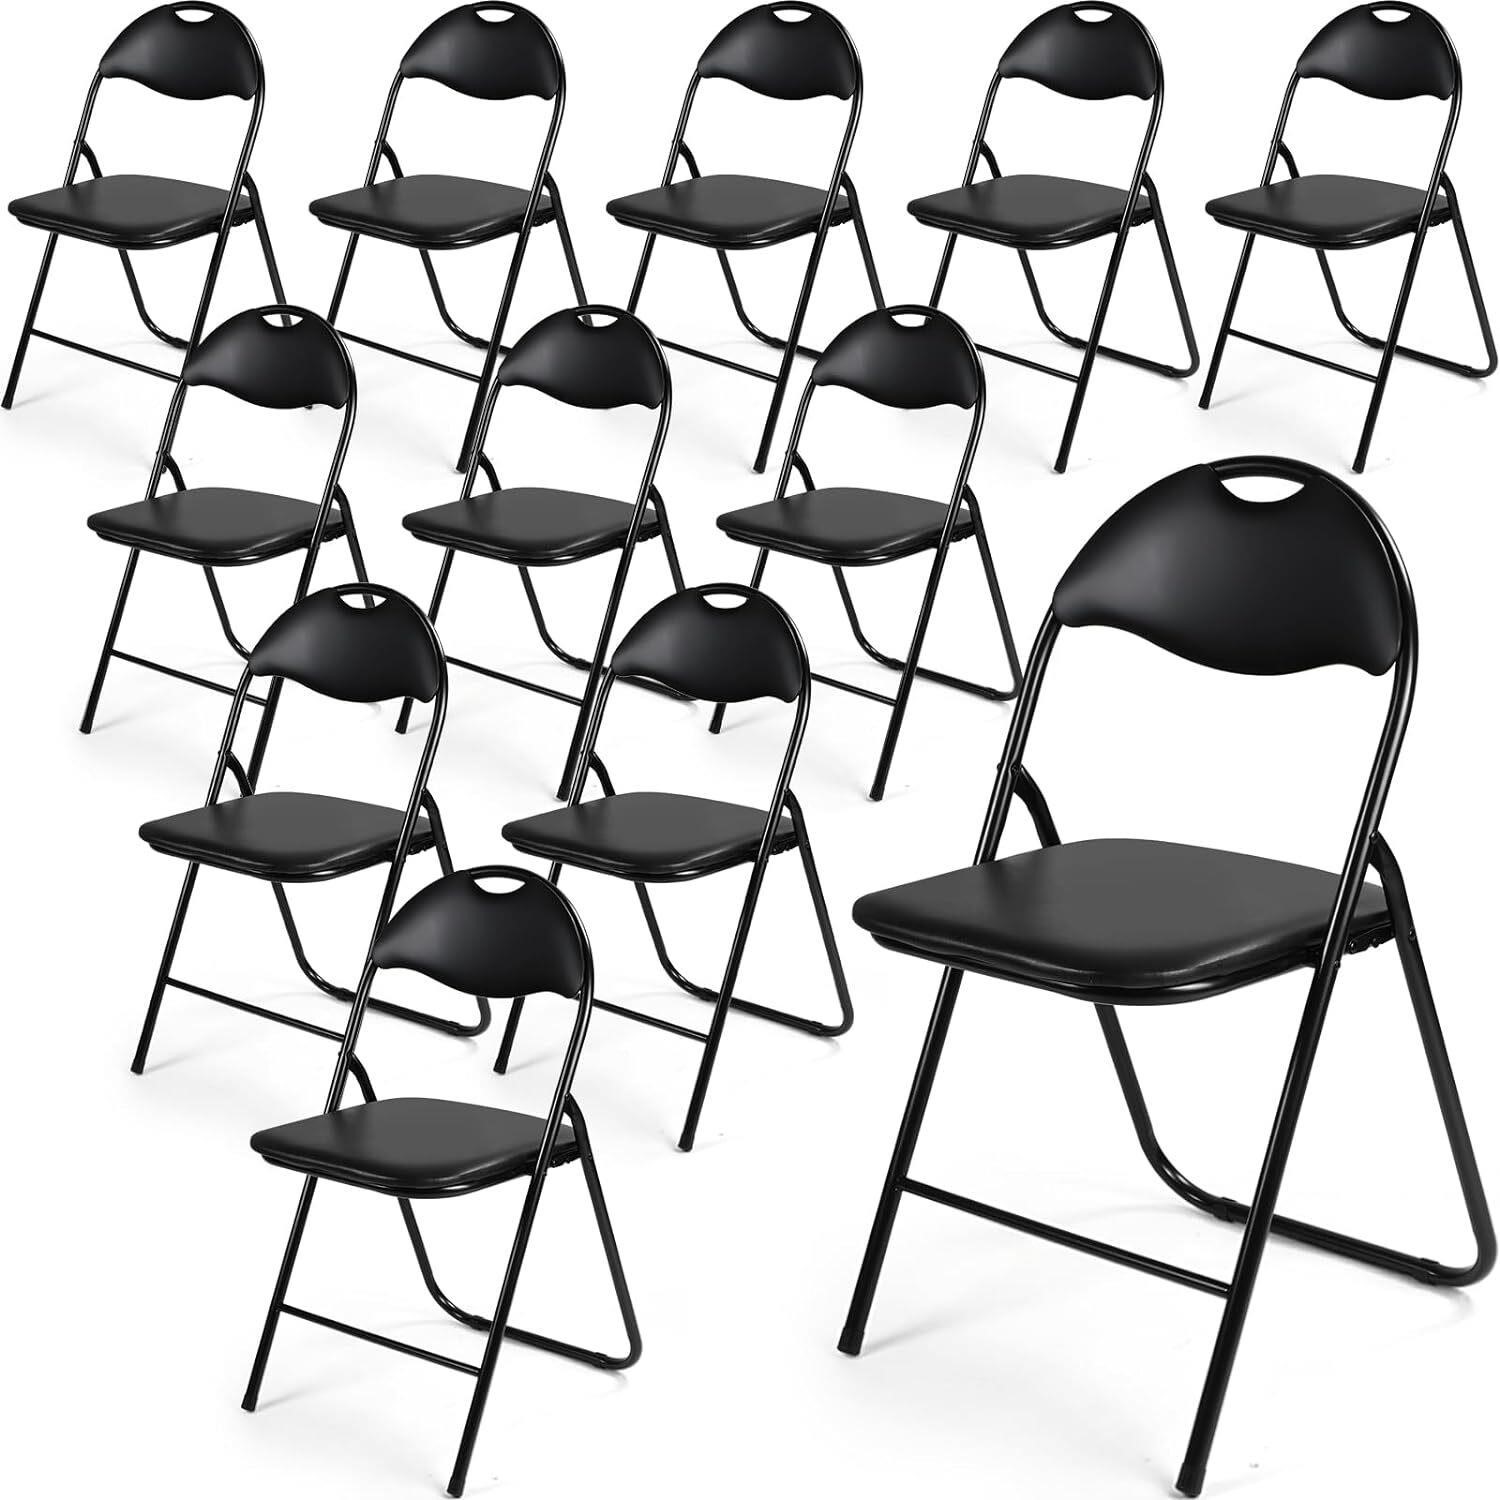 12 Pack Folding Chairs with PU Seat  Black